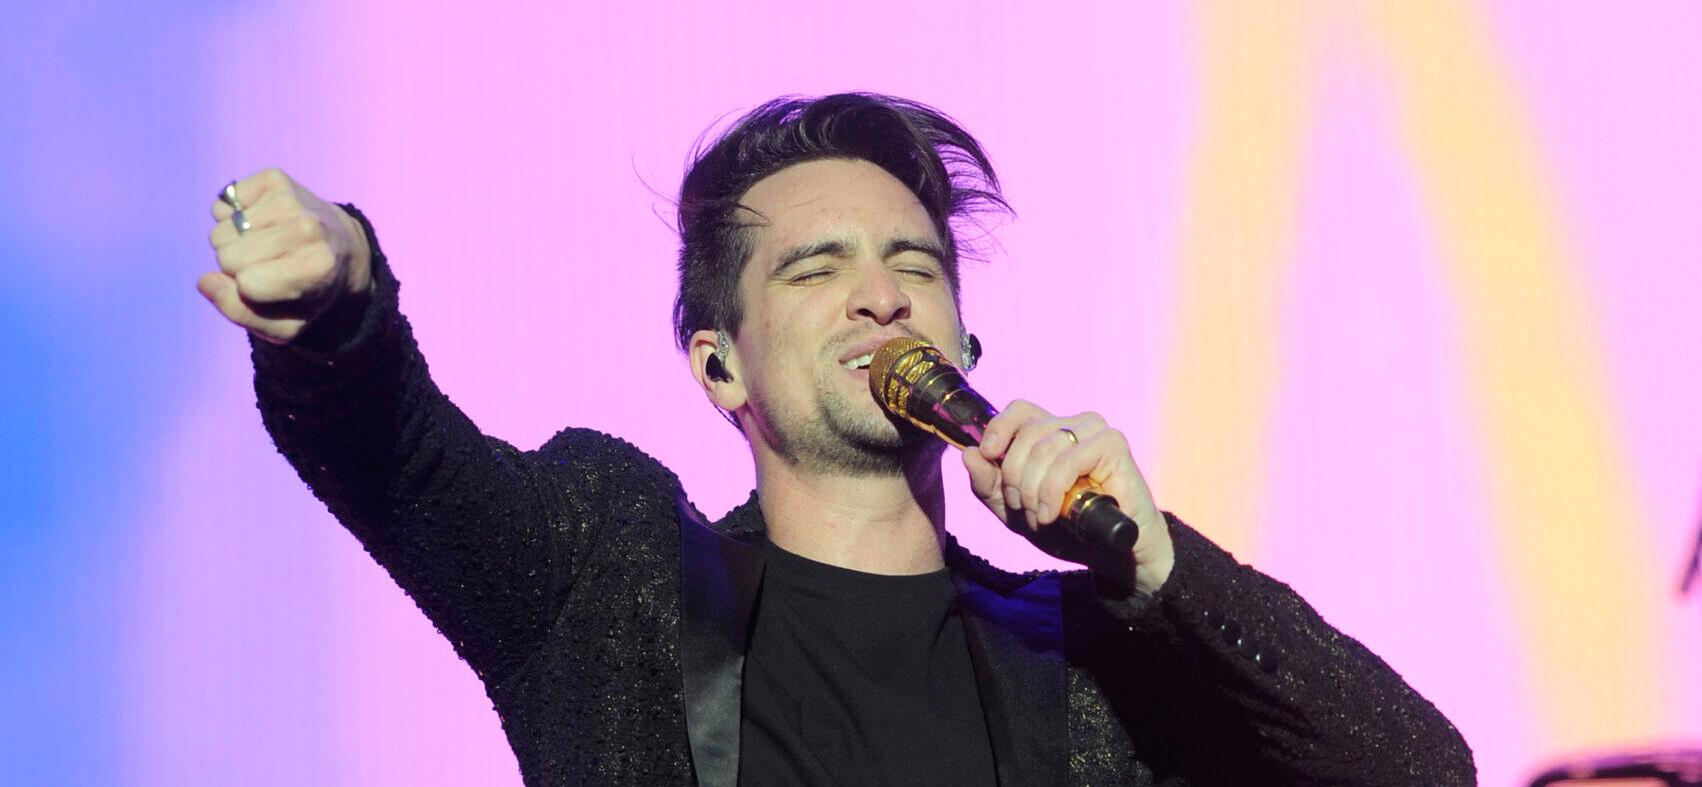 Panic! at the Disco performing at Reading Festival 2018